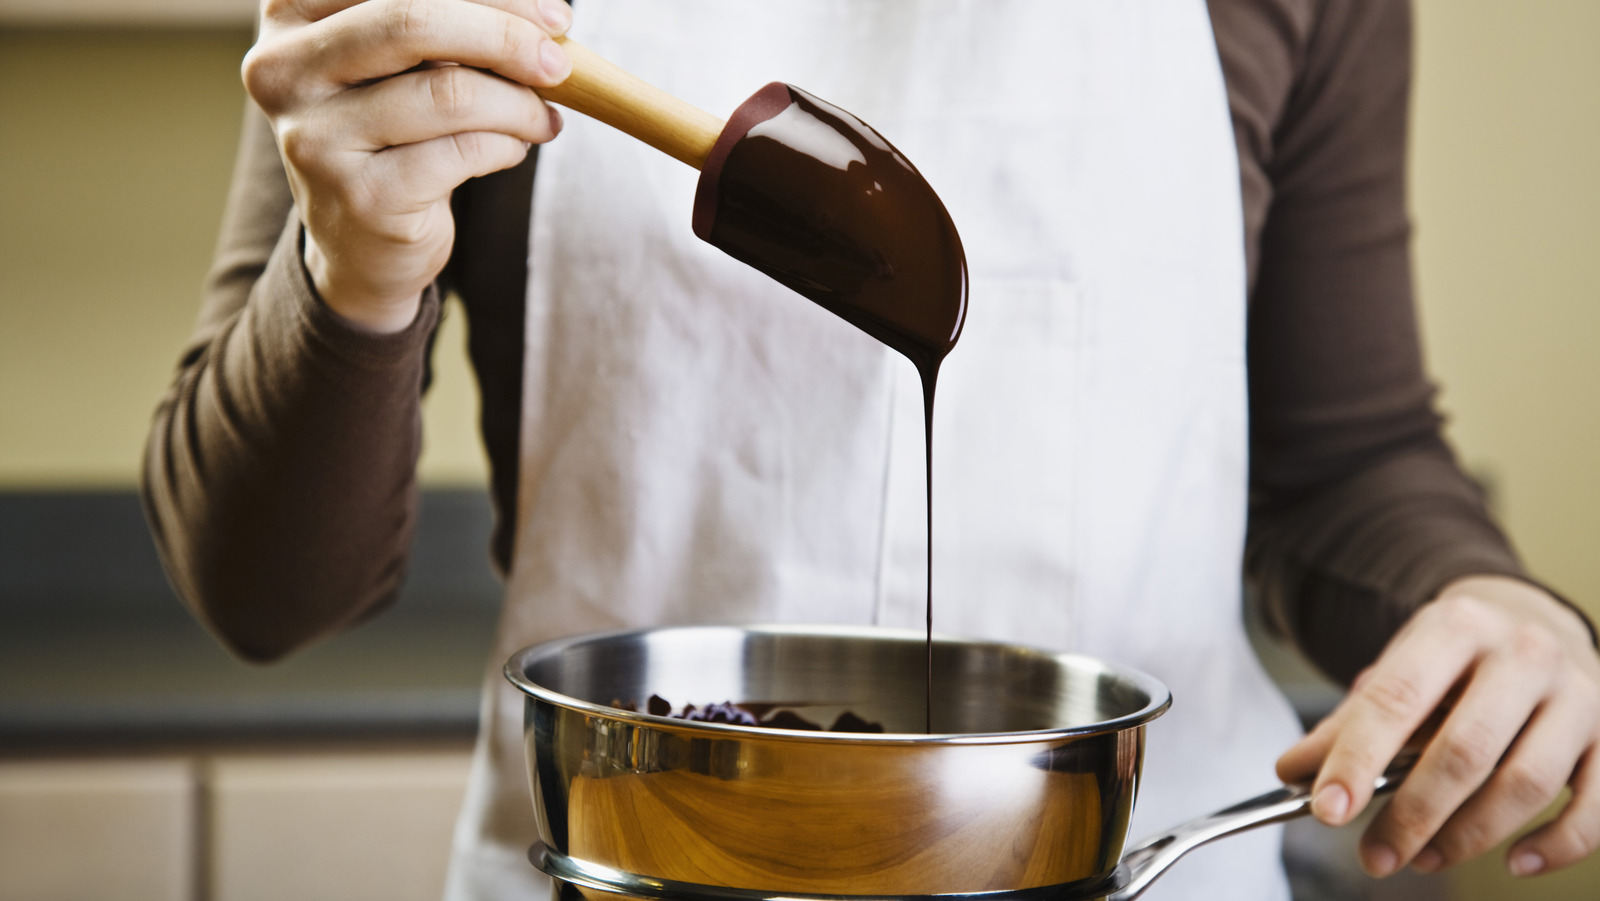 Using a Double Boiler